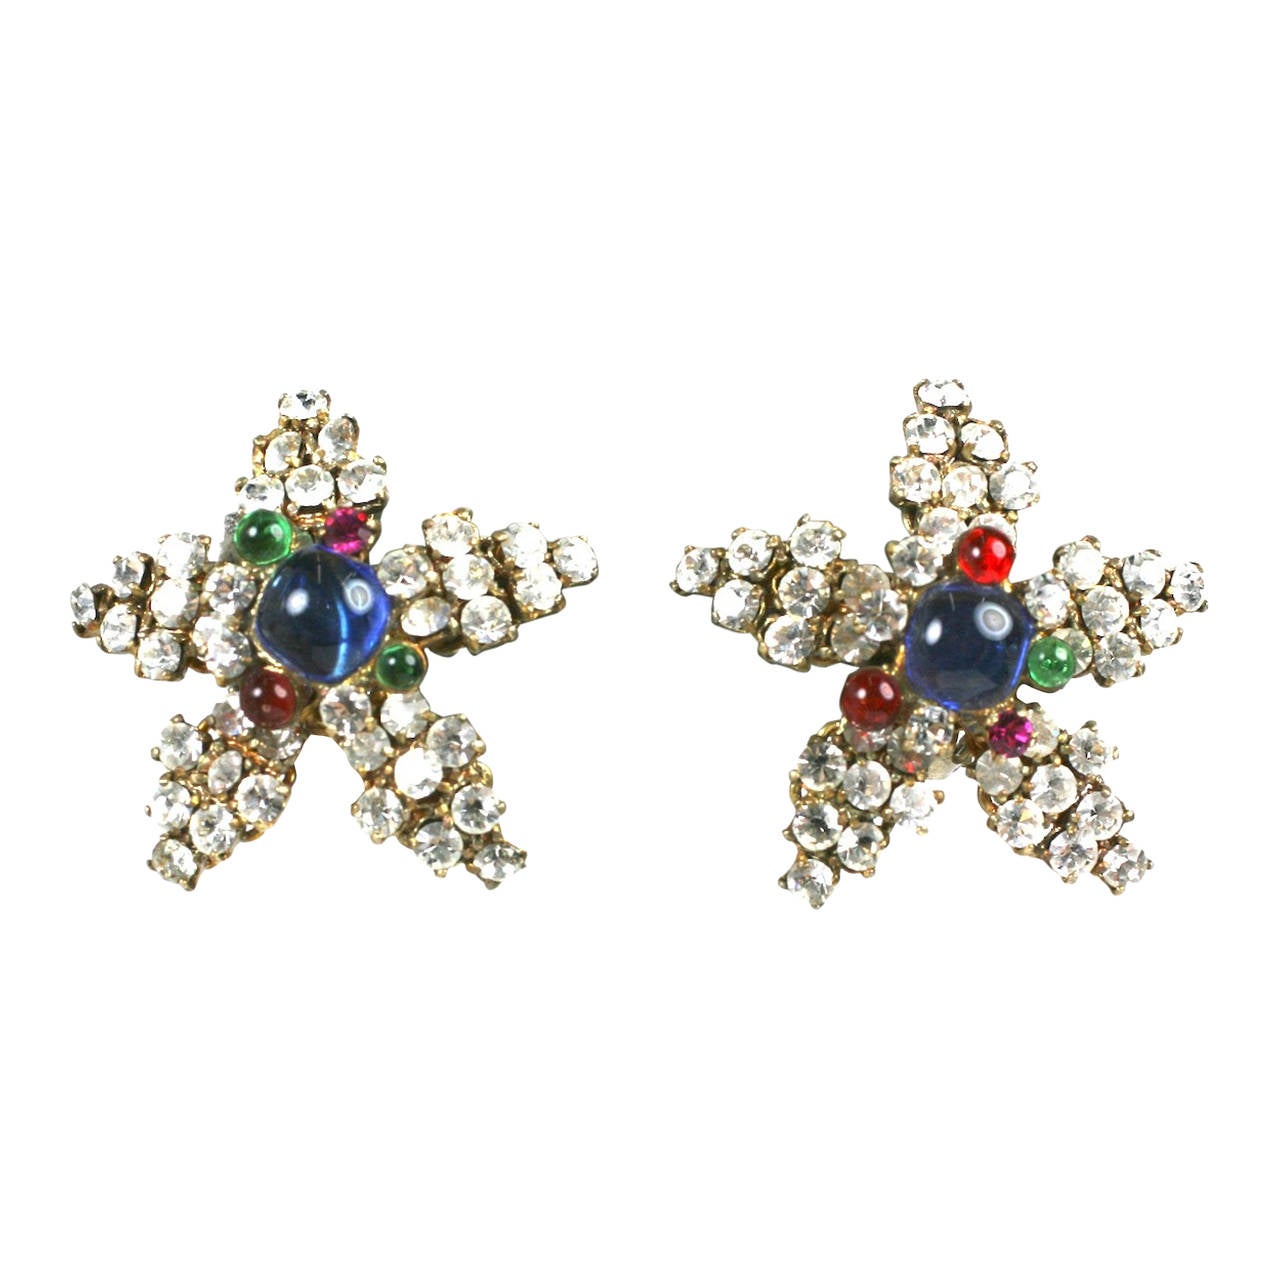  Maison Gripoix for Chanel Poured Glass Pave Star Earrings For Sale